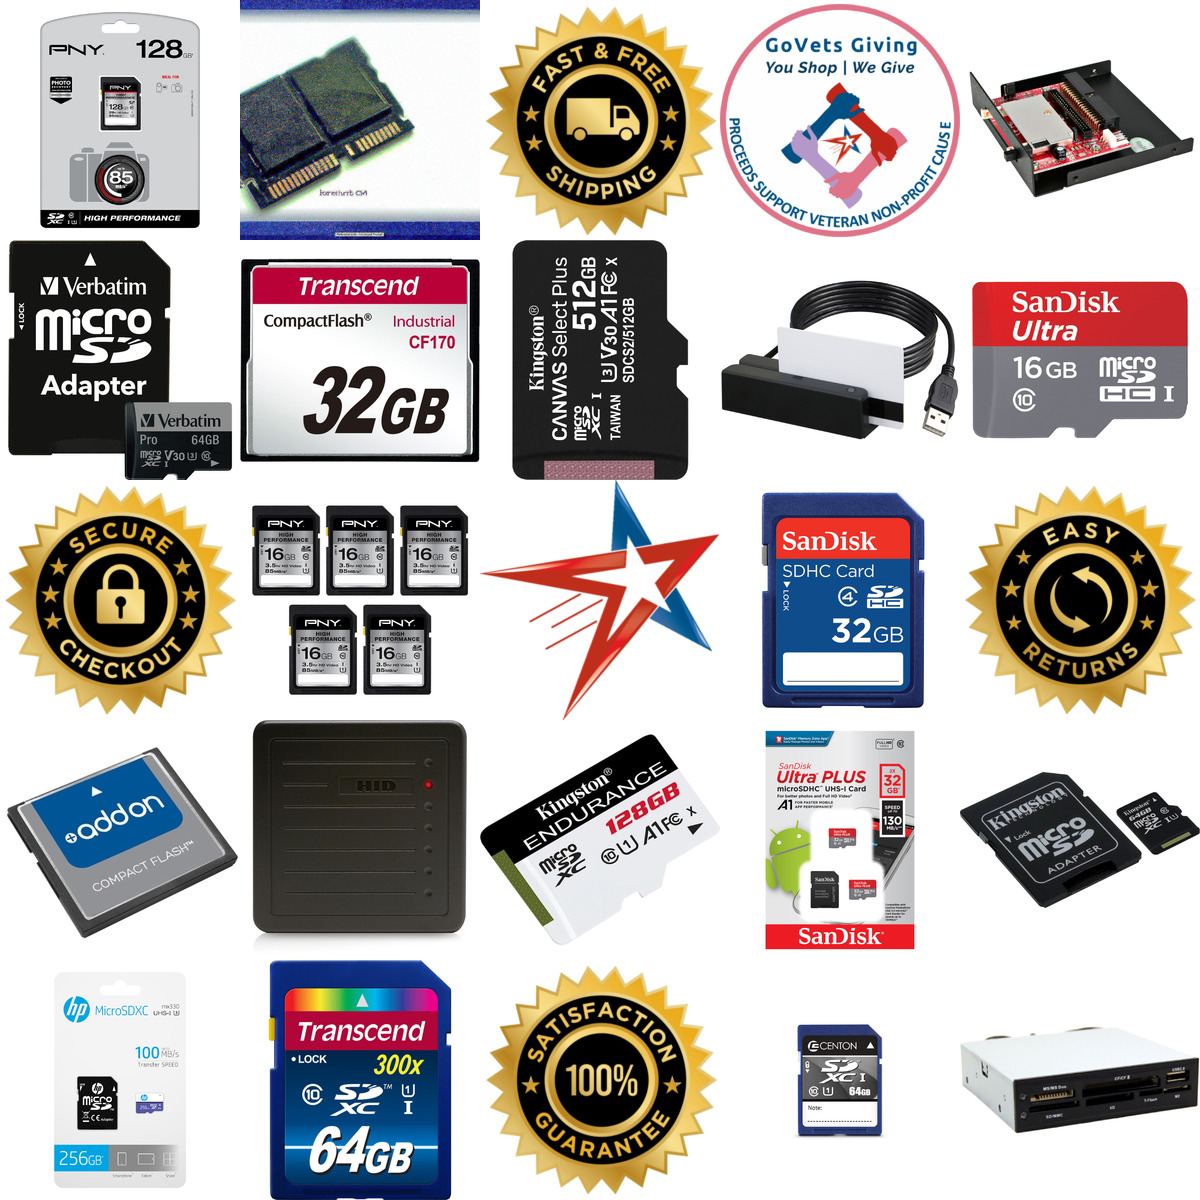 A selection of Camera Memory Cards products on GoVets